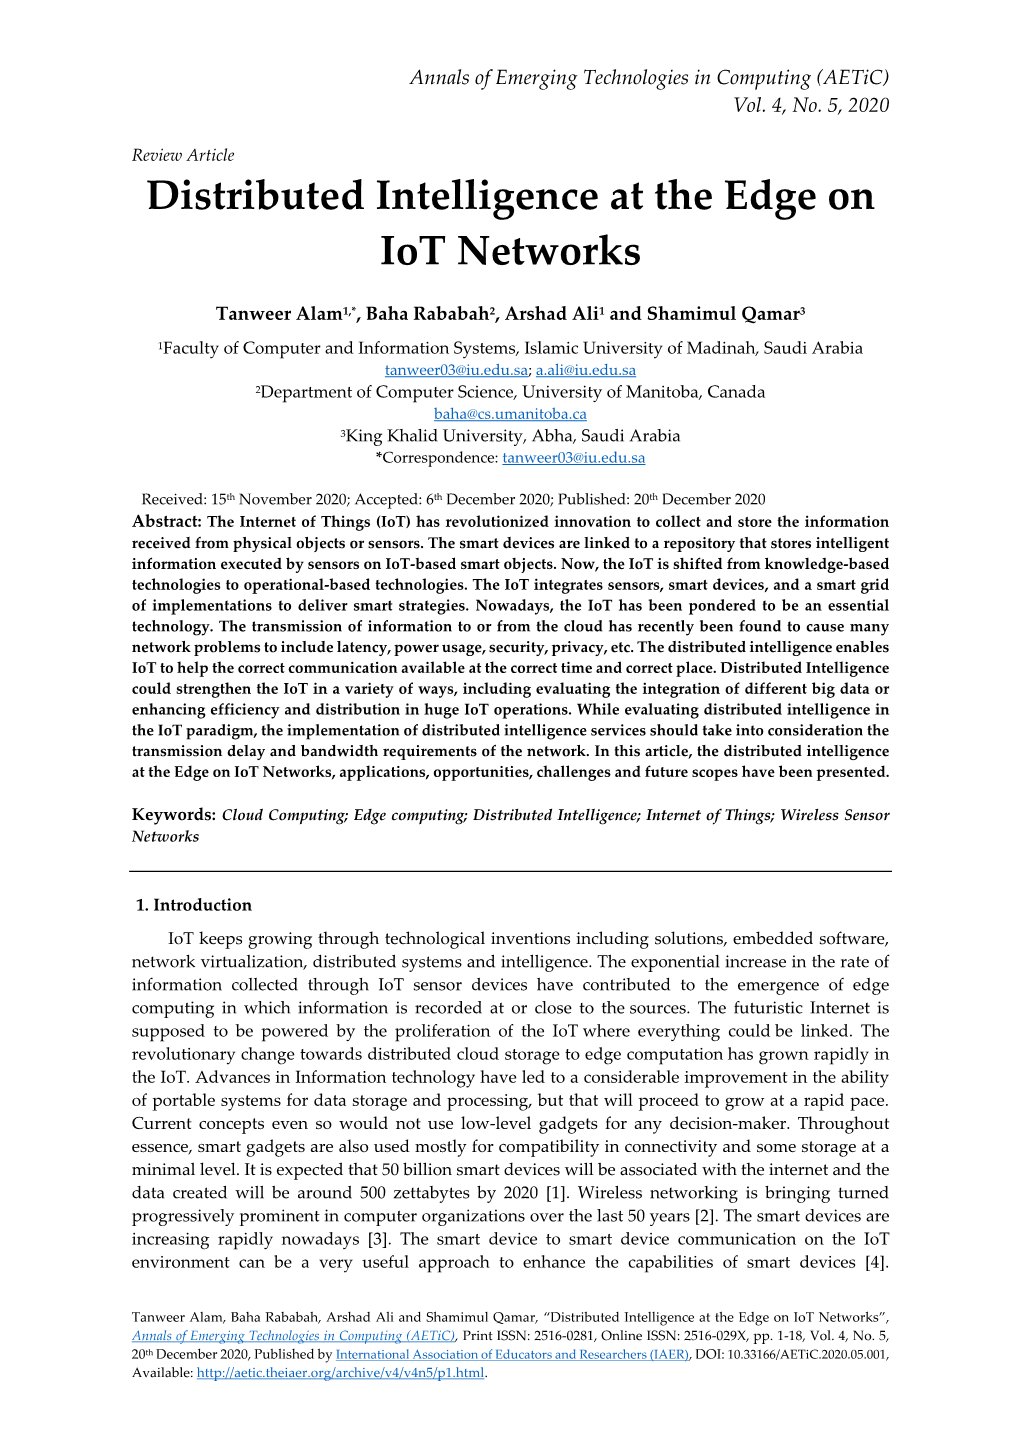 Distributed Intelligence at the Edge on Iot Networks, Applications, Opportunities, Challenges and Future Scopes Have Been Presented